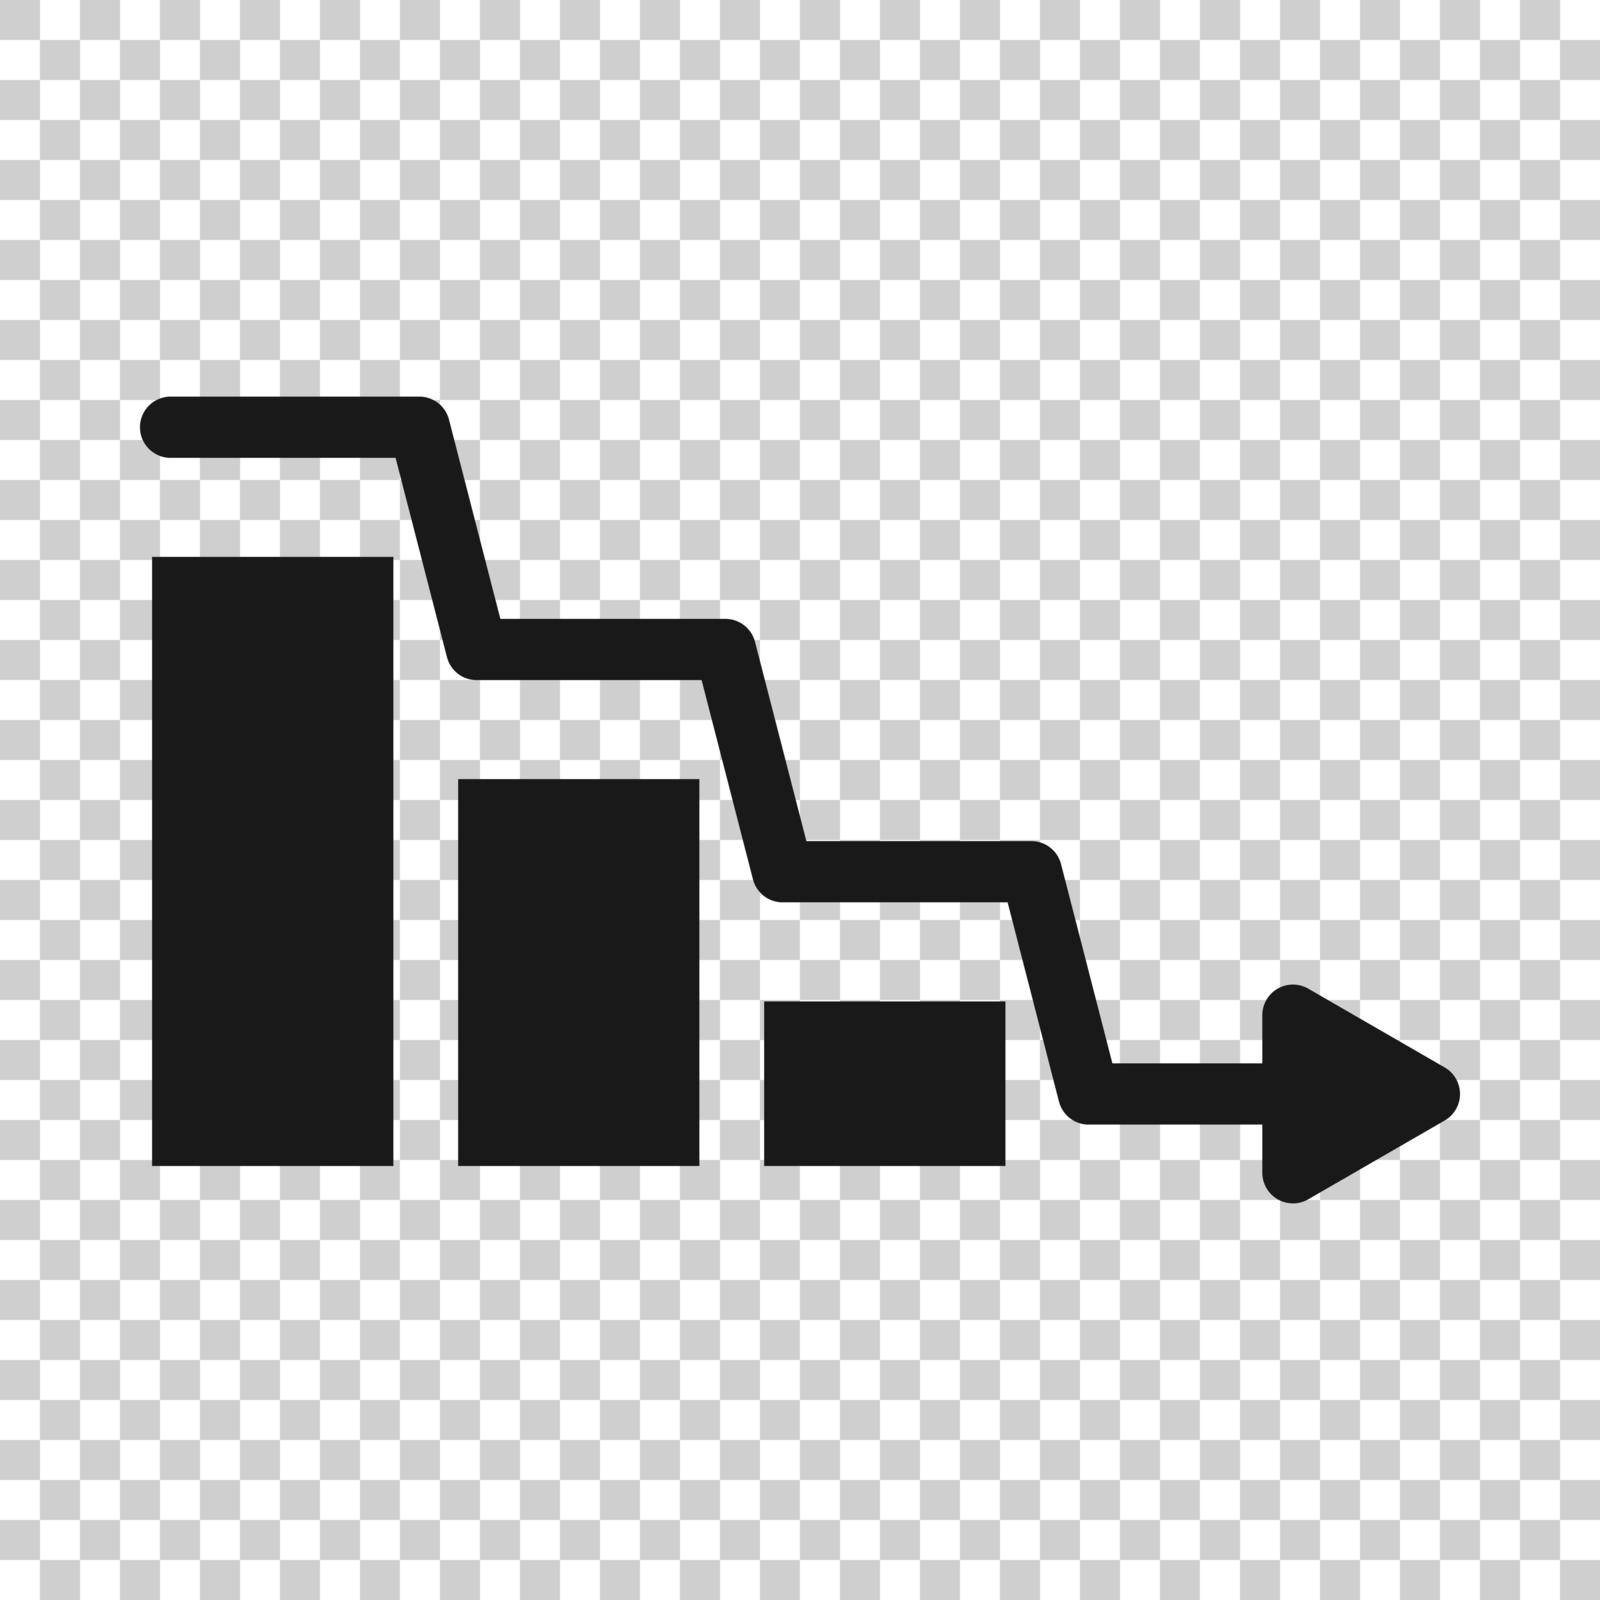 Market trend icon in flat style. Decline arrow with magnifier vector illustration on white isolated background. Decrease business concept.